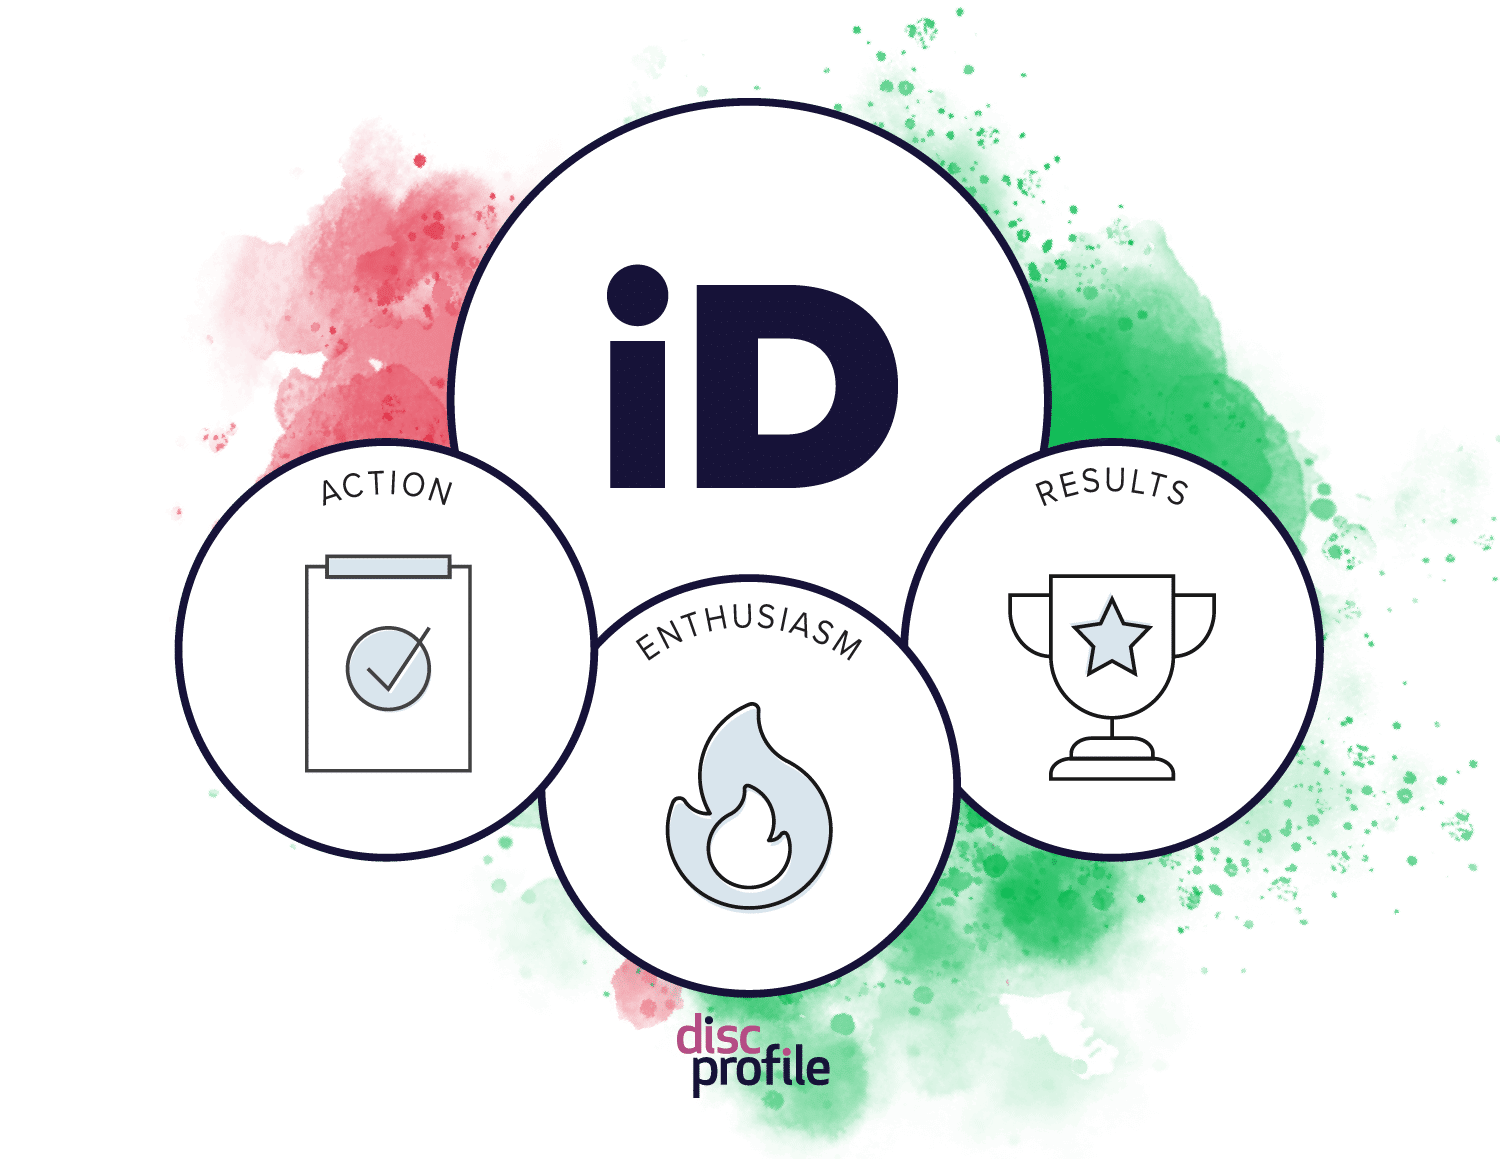 iD style graphic with priorities: action, enthusiasm, results